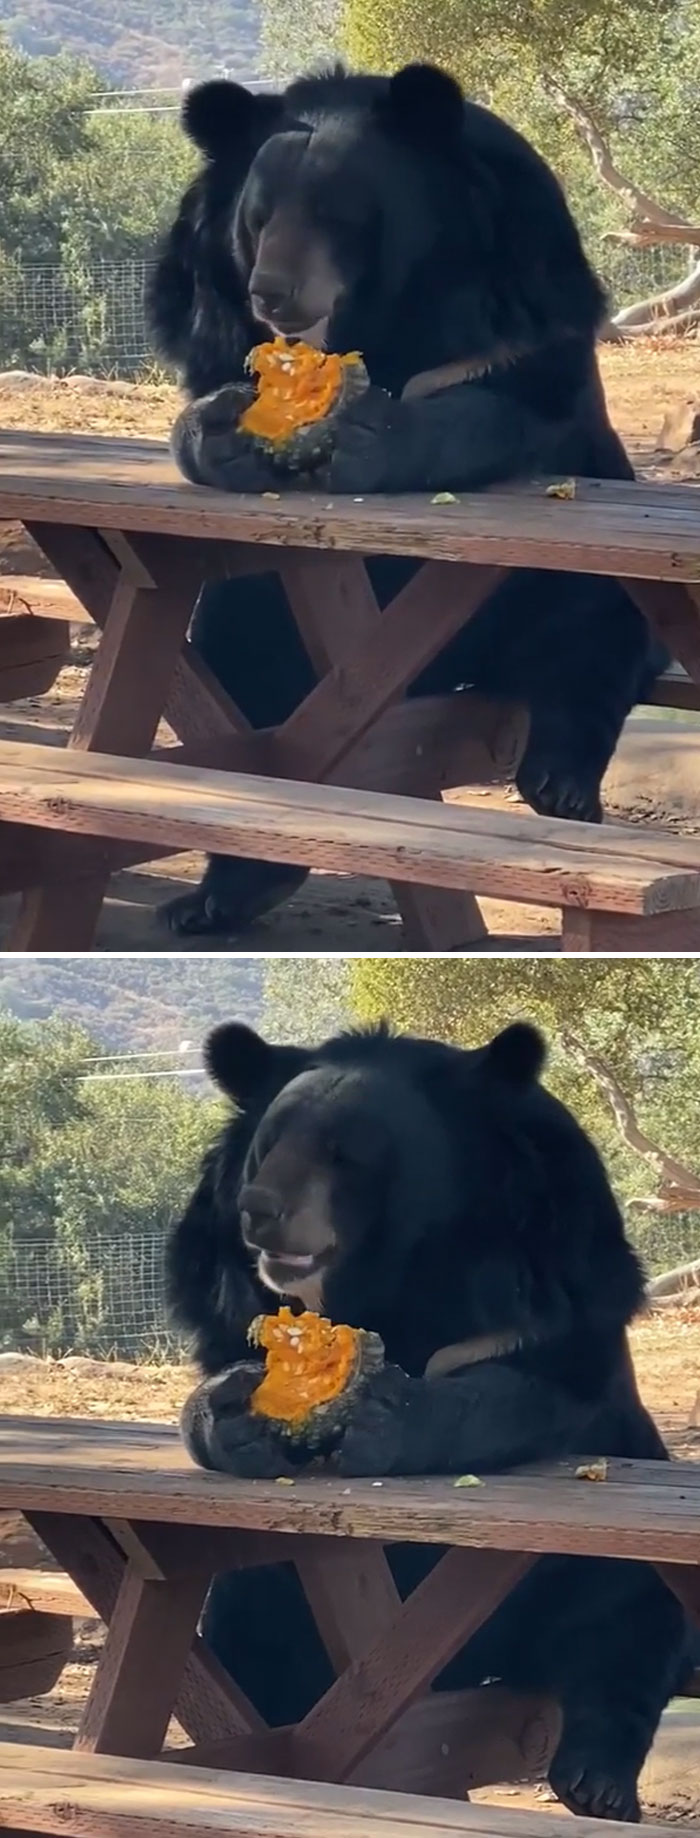 Just A Bear Eating His Lunch That Is All